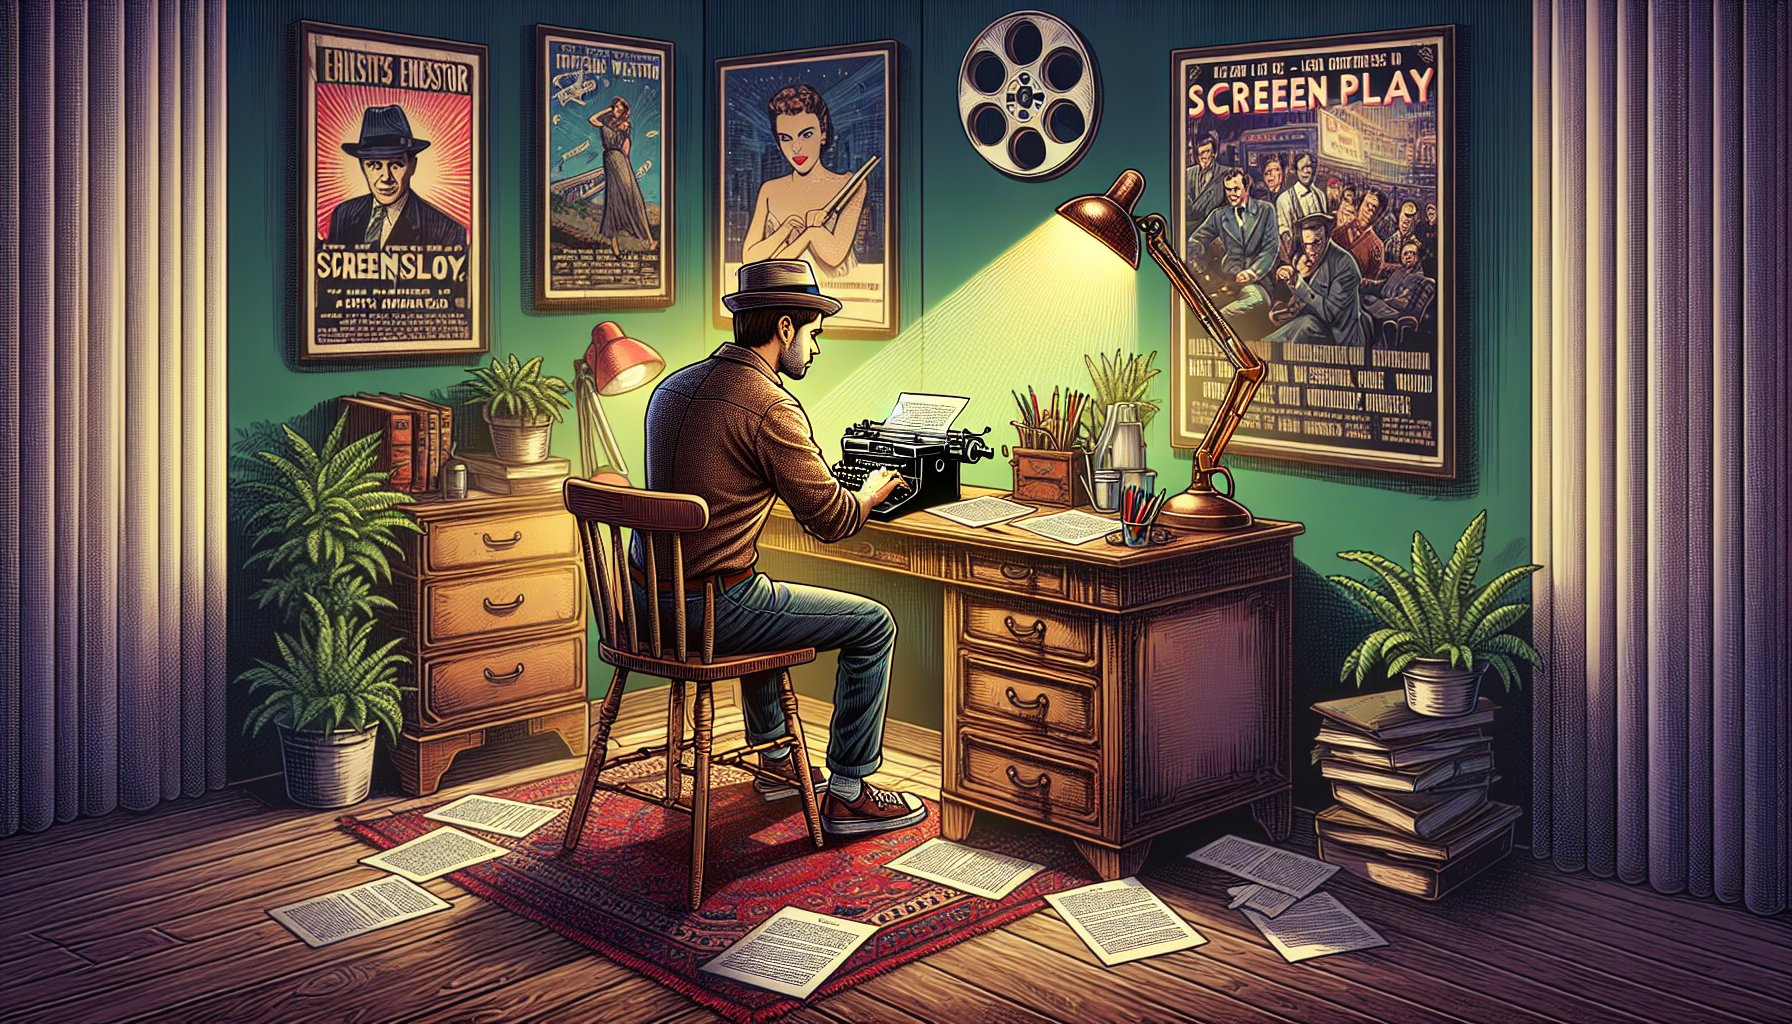 An aspiring writer sitting at an antique desk, surrounded by classic film posters, typing on a vintage typewriter under a soft desk lamp, with a thick screenplay manual and scattered screenplay pages